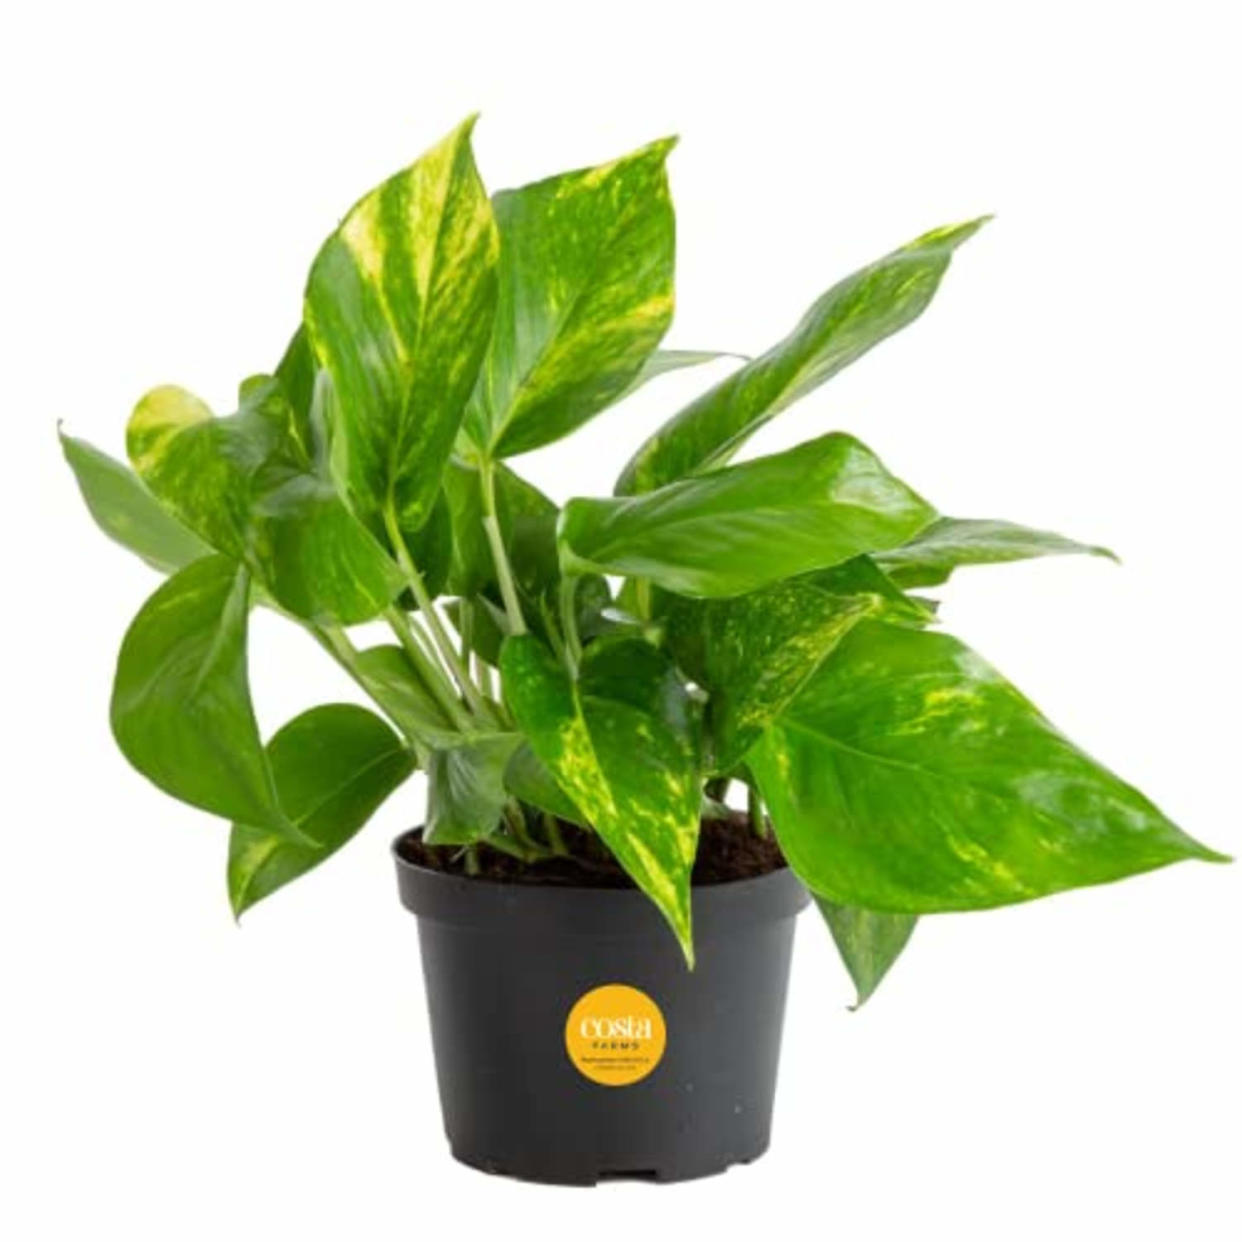 Costa Farms Golden Pothos Live Plant, Easy Care Indoor House Plant in Grower's Pot, Potting Soil, Great for Outdoor Hanging Planter or Basket, Housewarming Gift, Desk Decor, Room Decor, 10-Inches Tall (AMAZON)